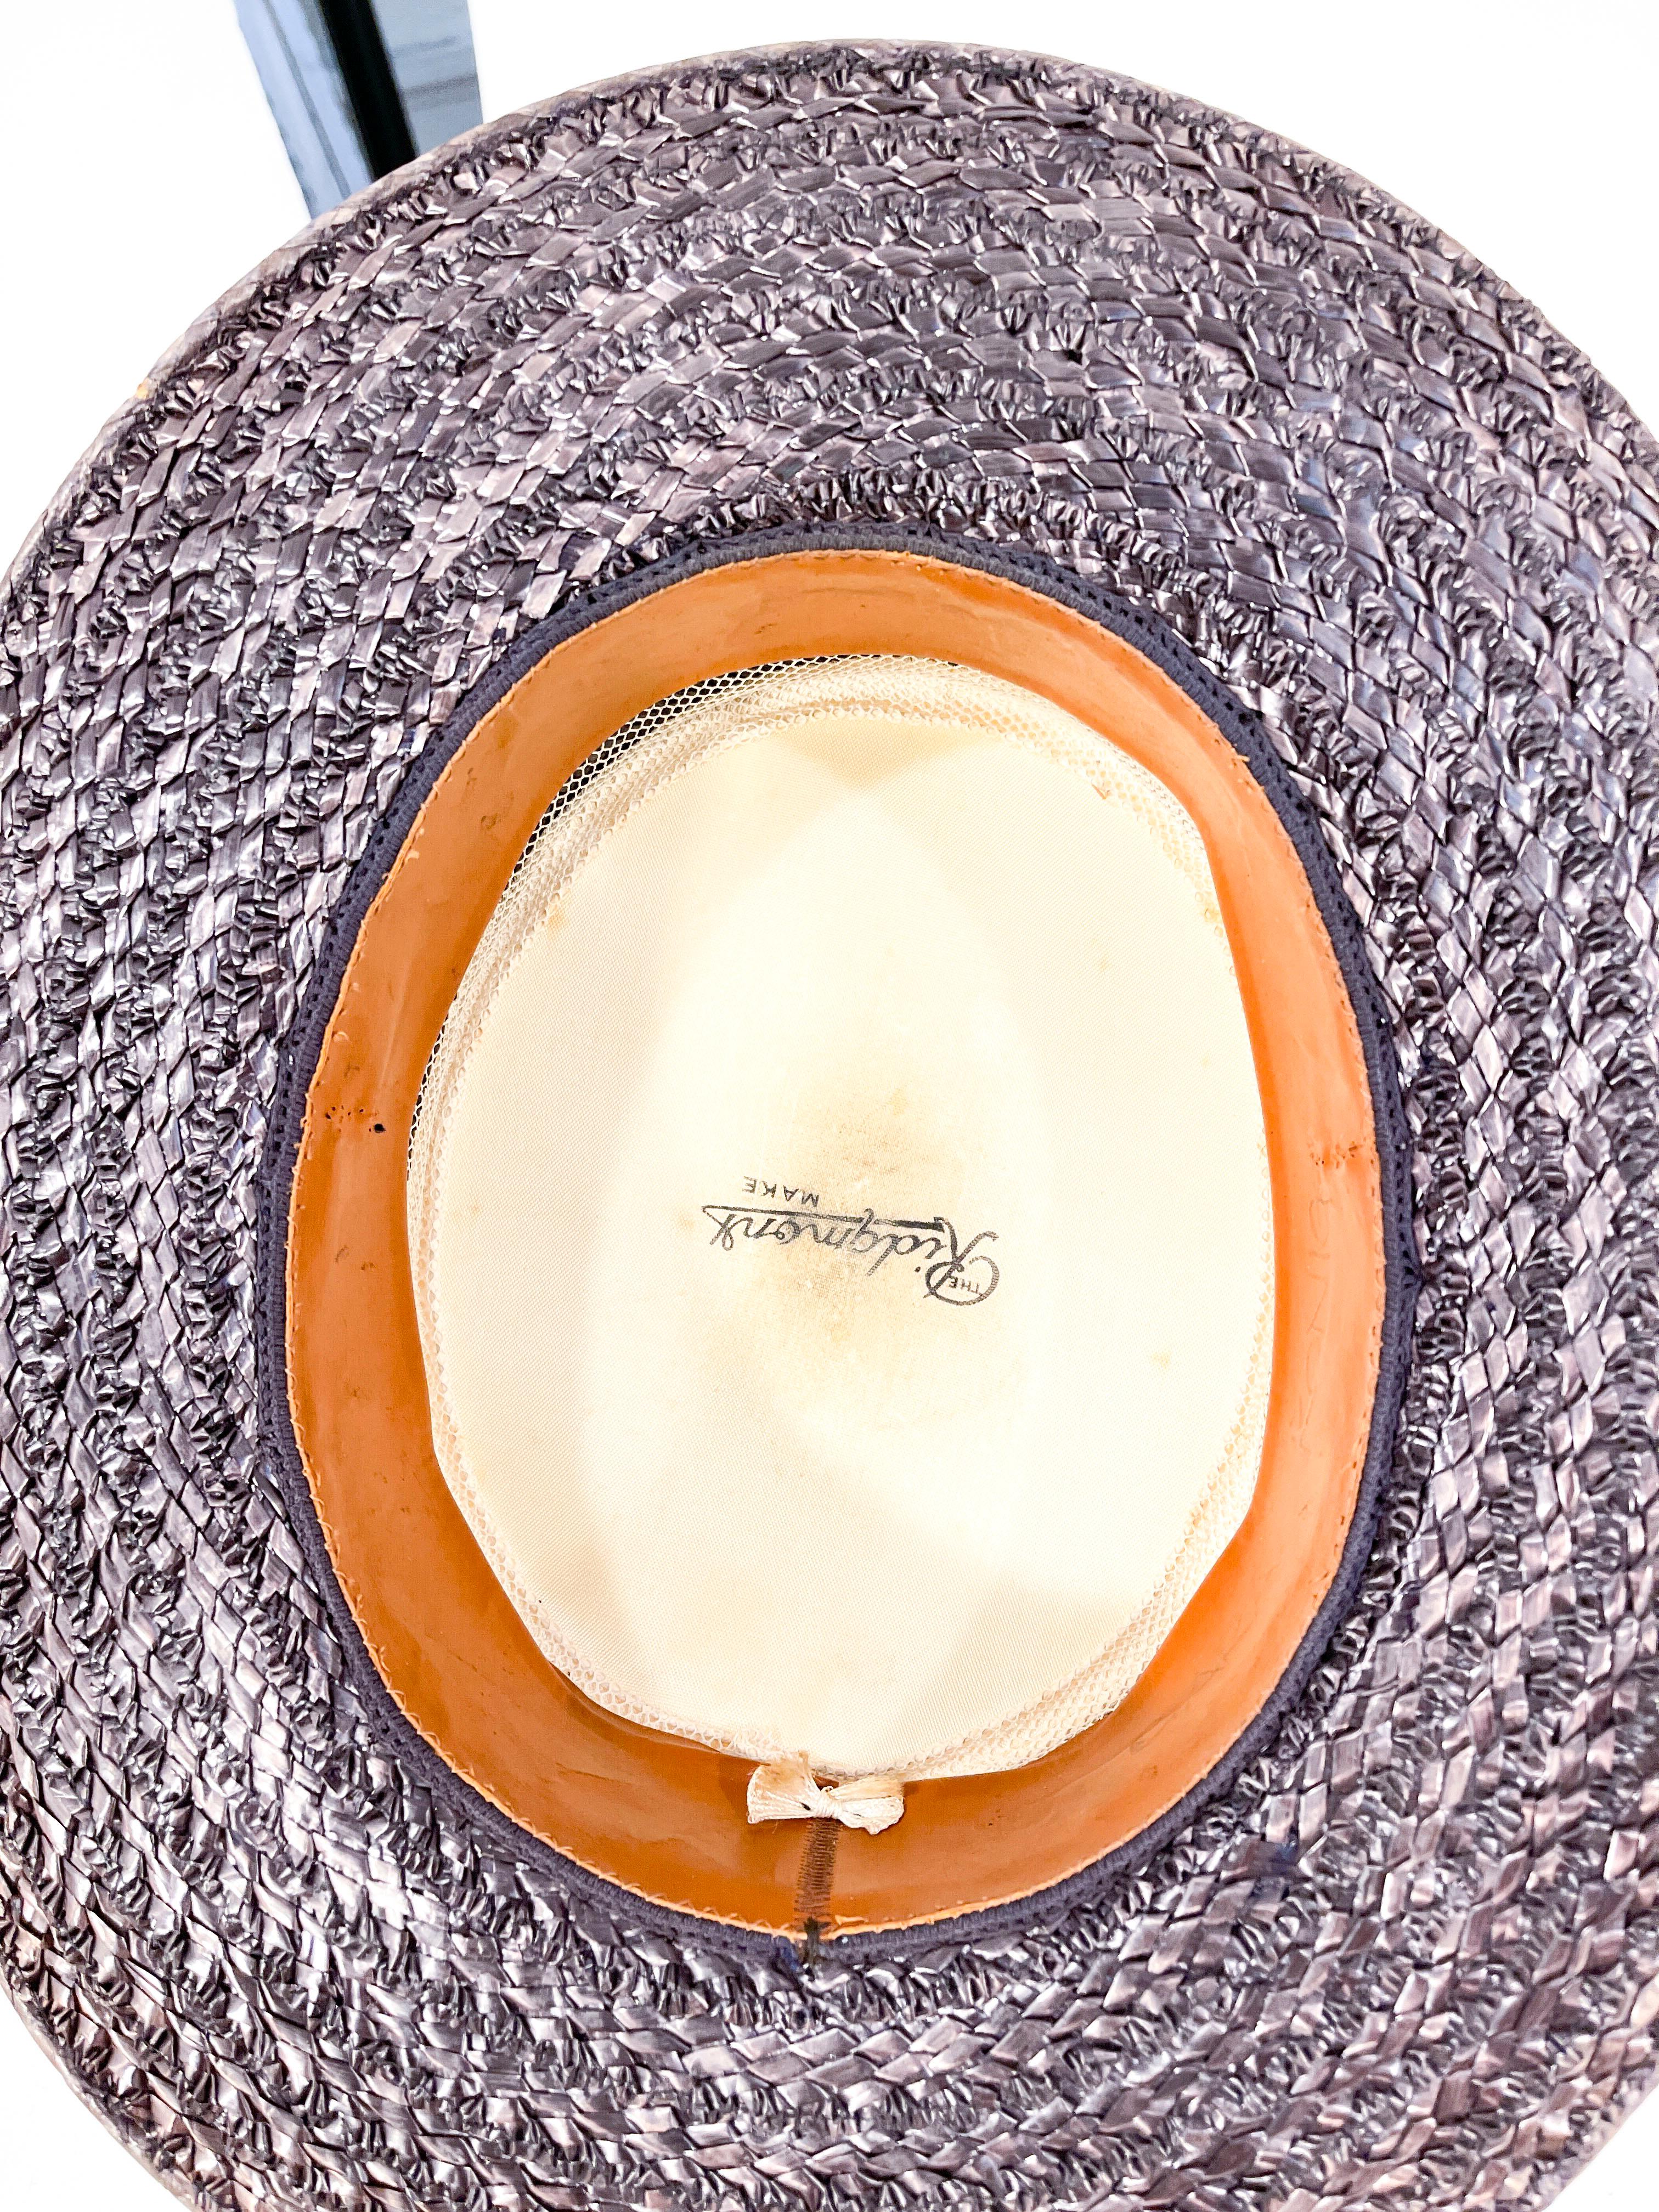 1920s Ladies Boater Hat In Good Condition For Sale In San Francisco, CA